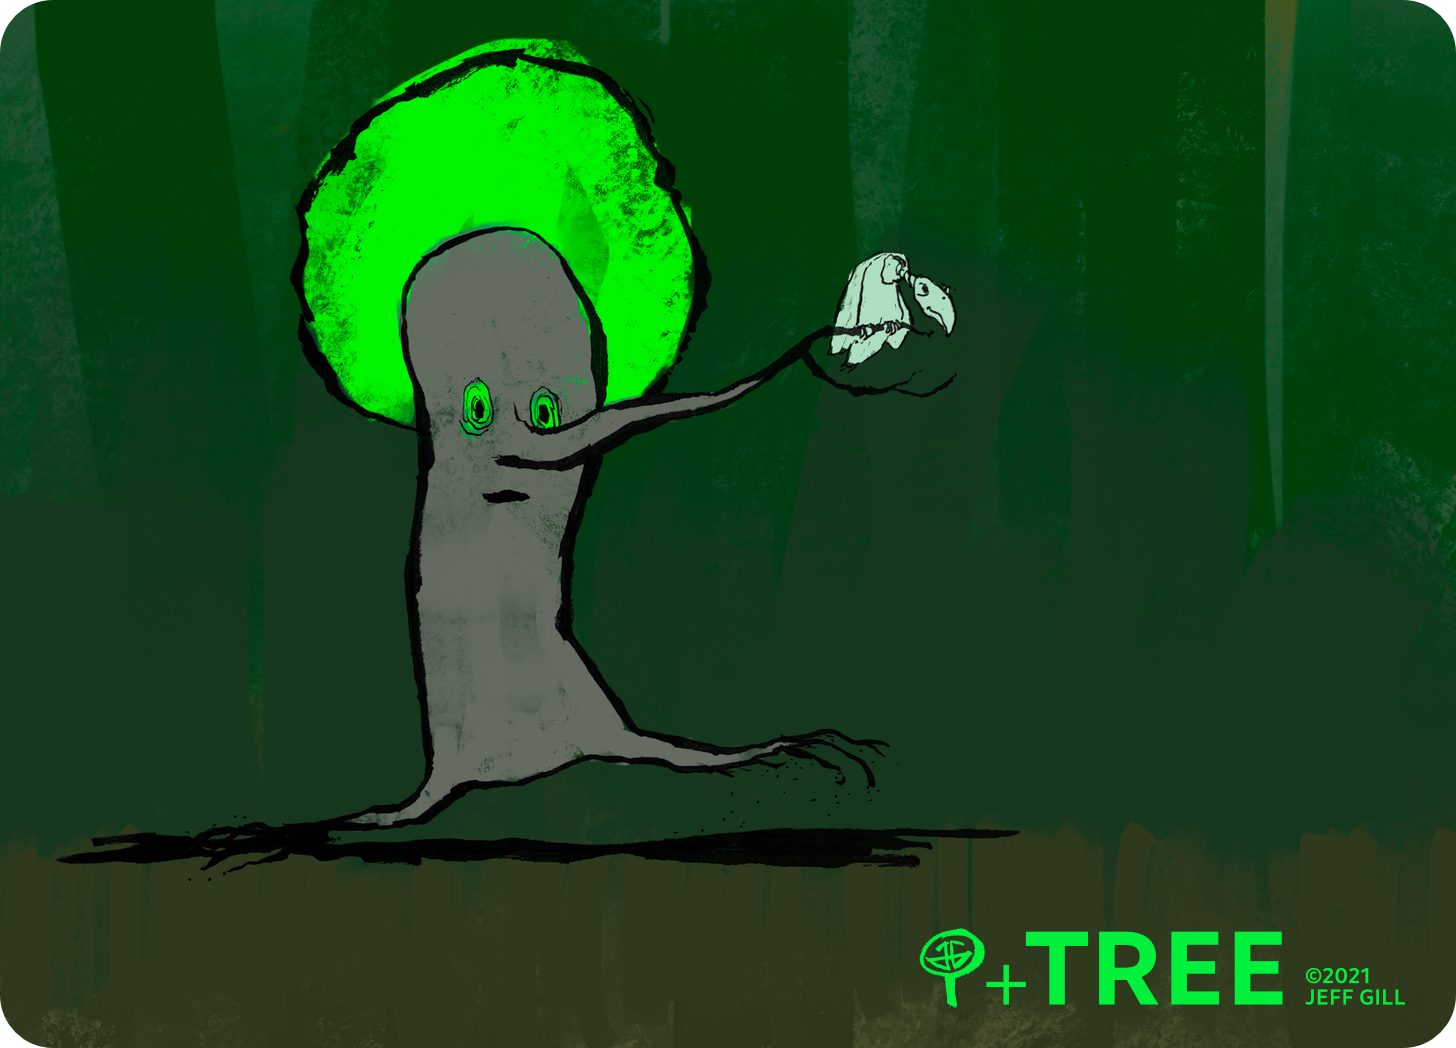 An illustration of a tree walking on its root legs in a dark forest. What appears to be a ghost vulture is perched on the tree’s branch nose.